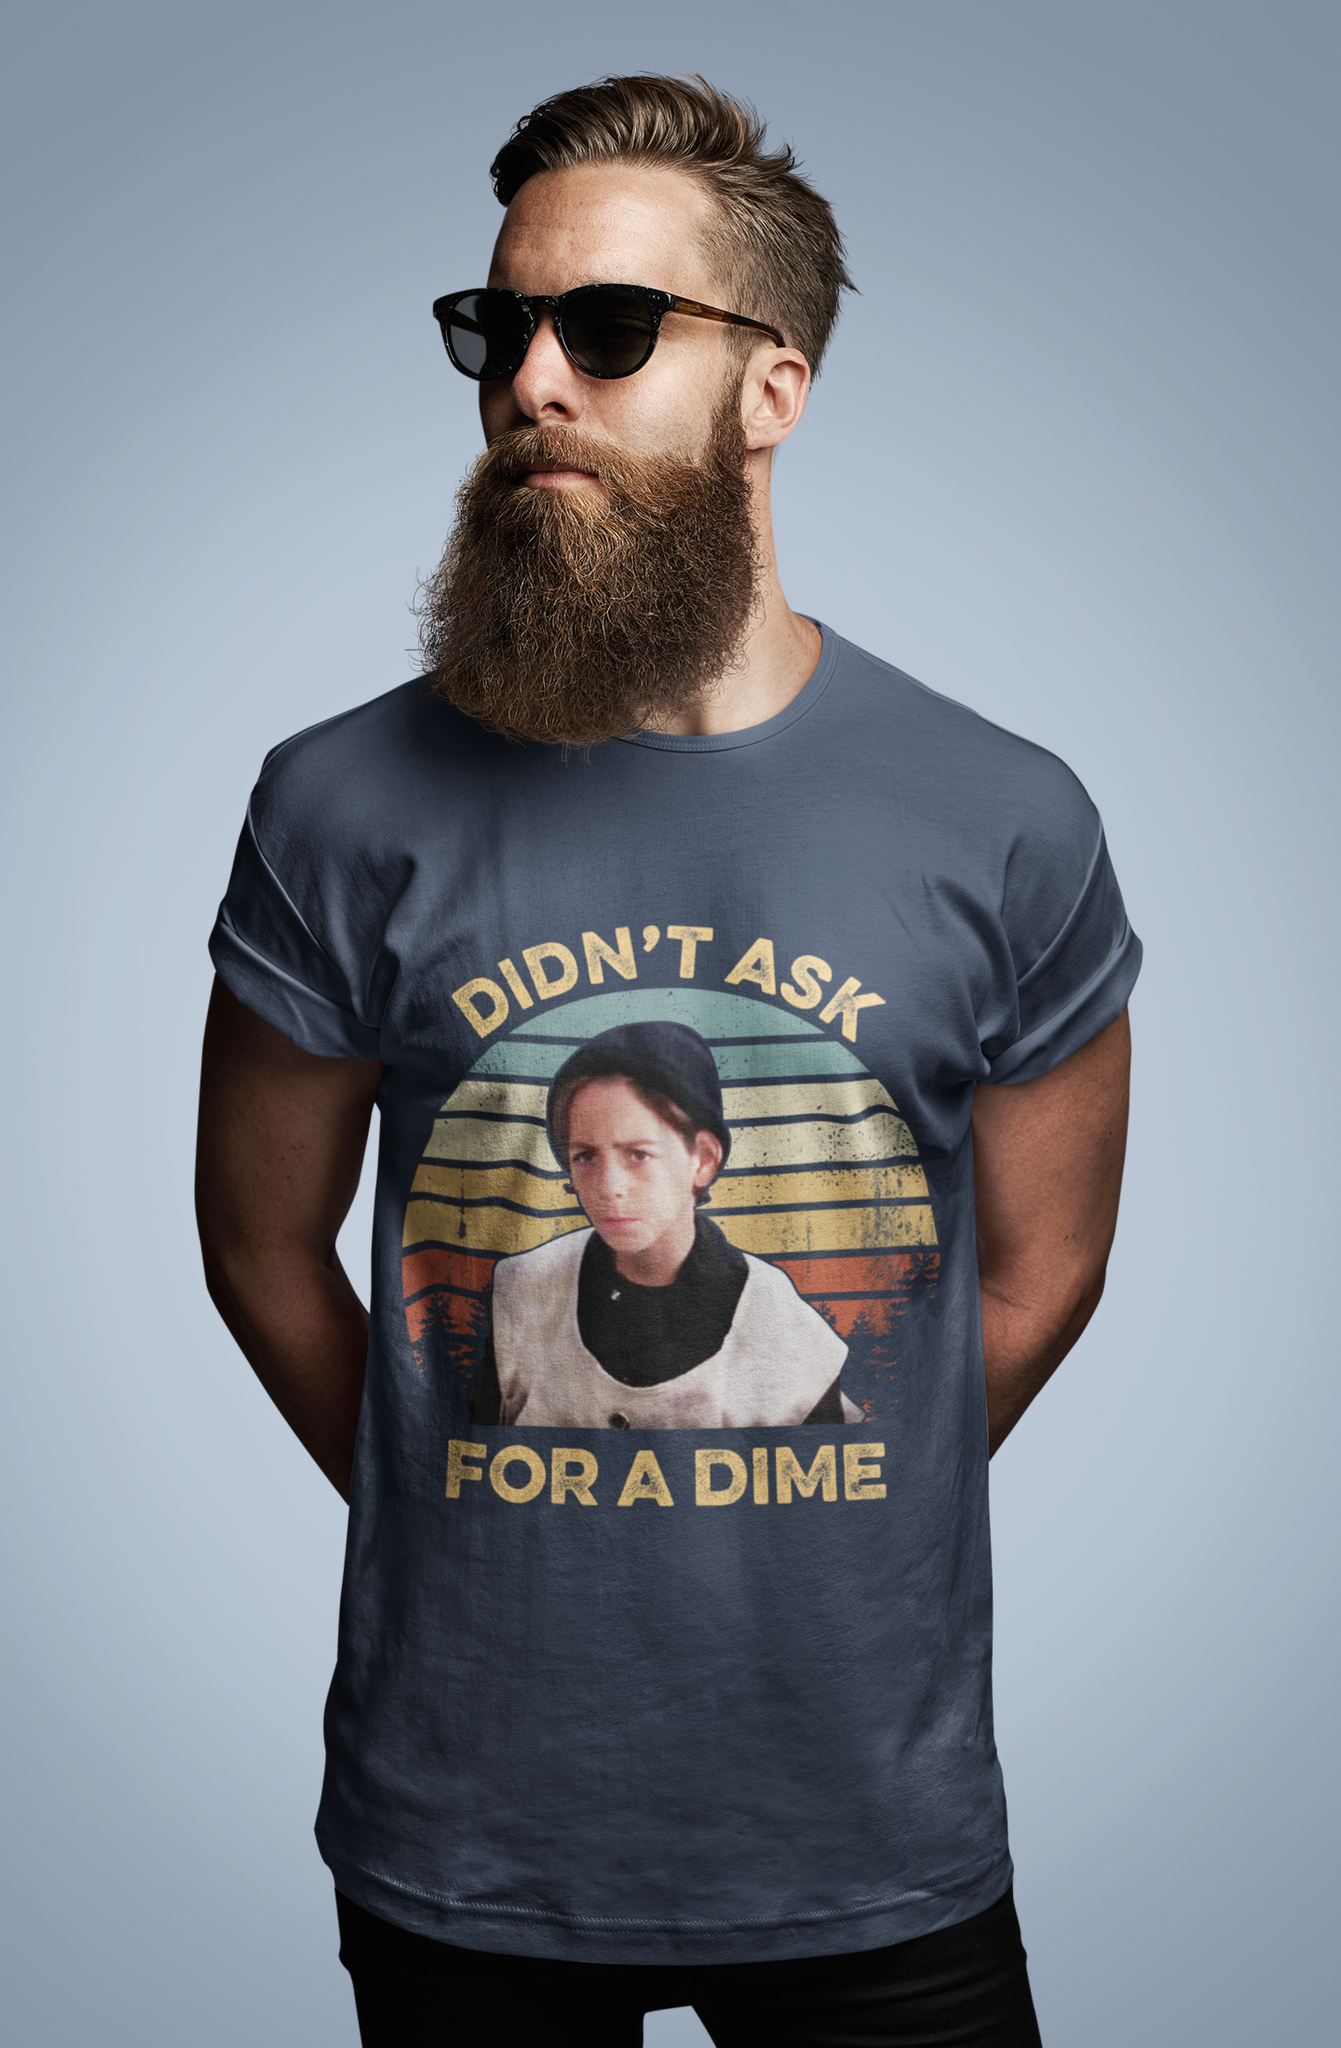 Better Off Dead Vintage T Shirt, Johnny Gasparini T Shirt, Didnt Ask For A Dime Tshirt